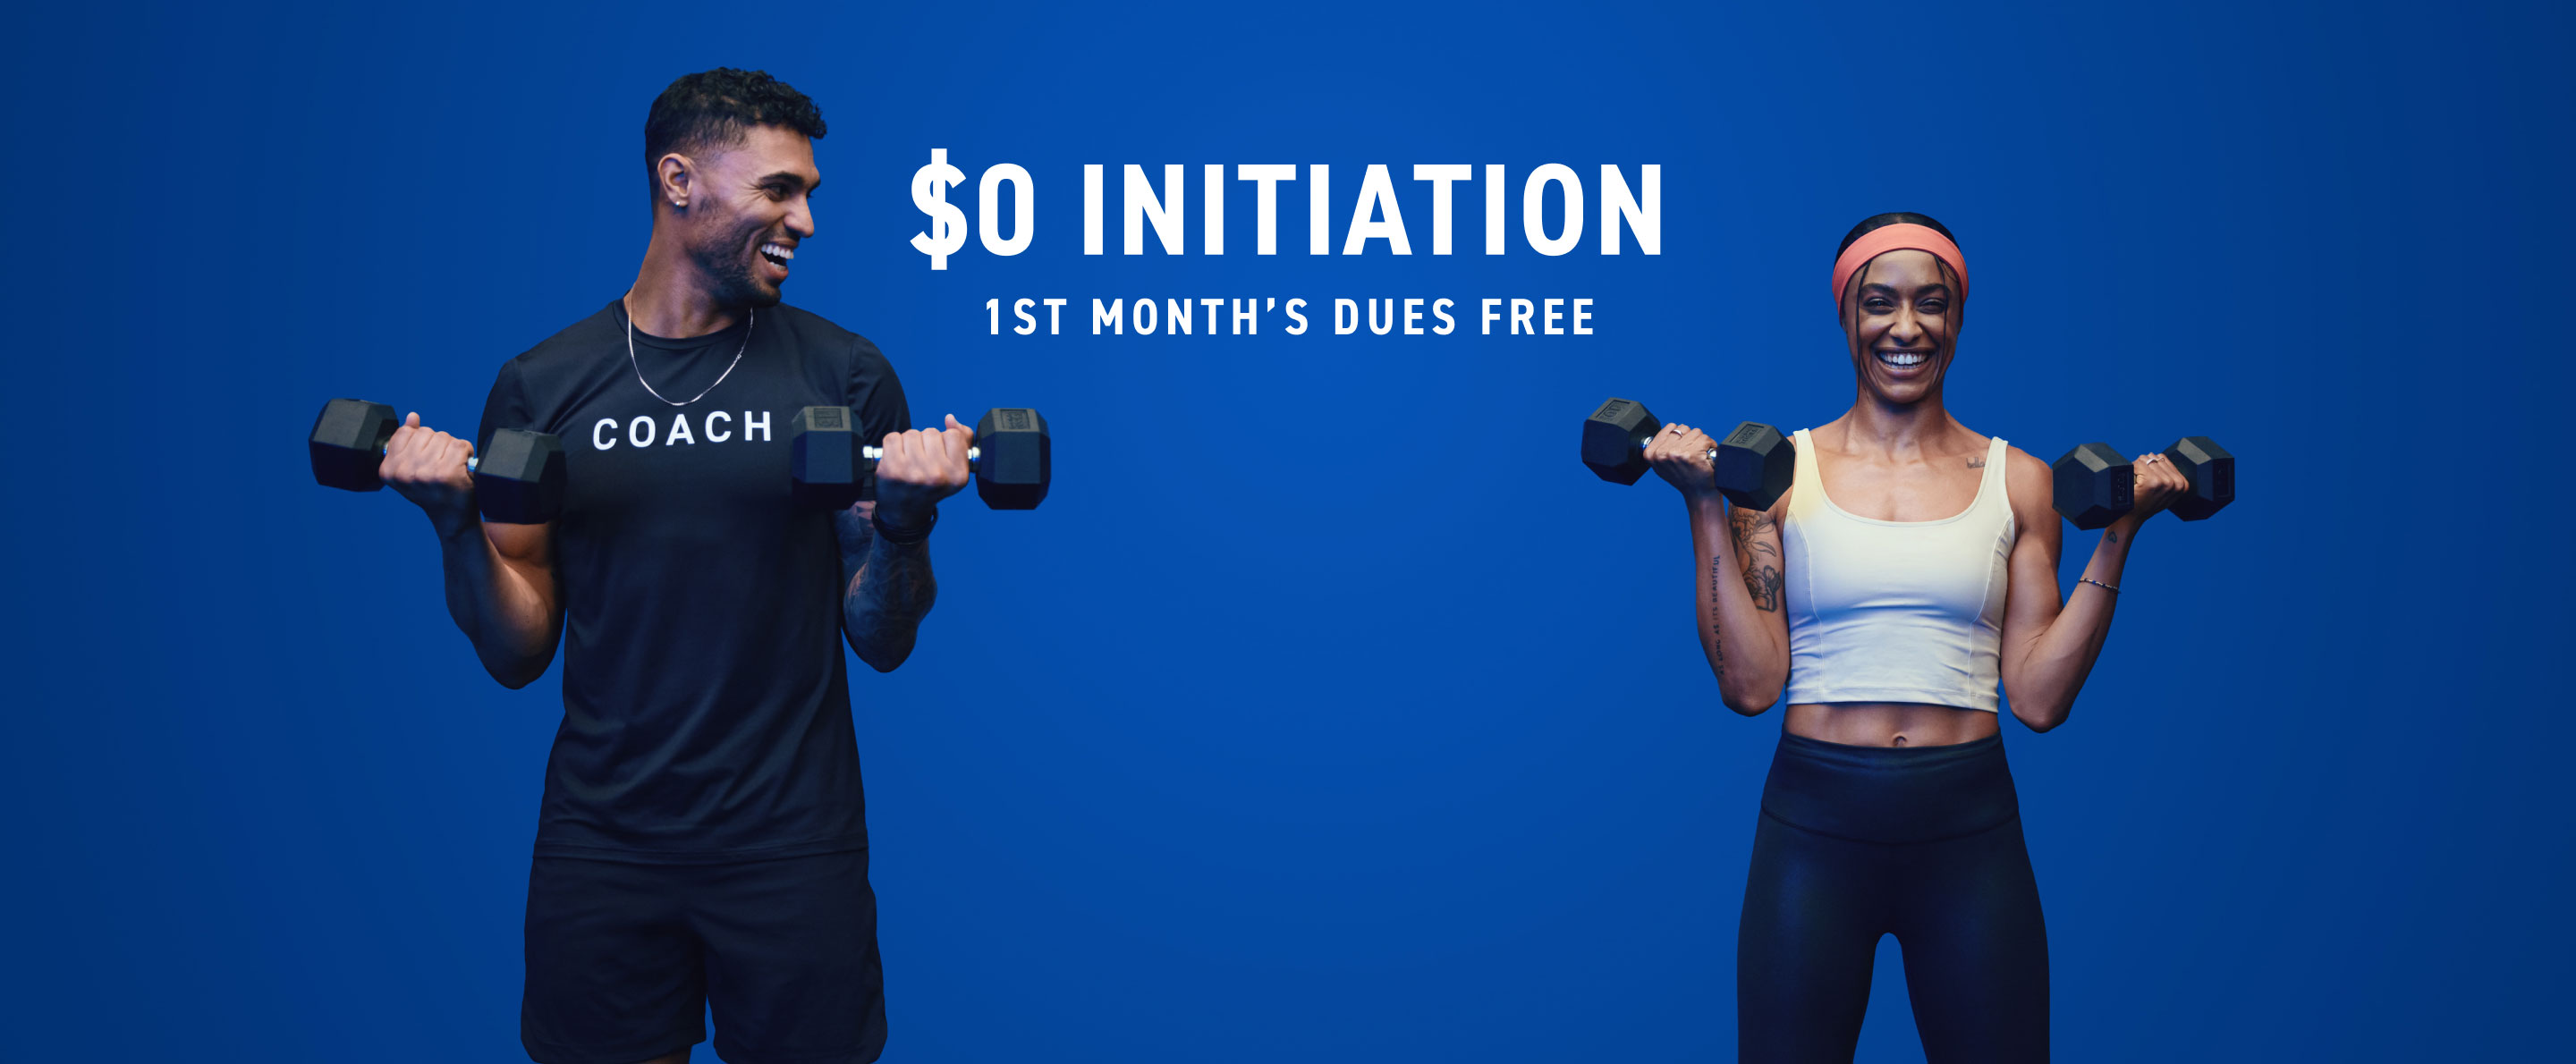 $0 INITIATION 1ST MONTH’S DUES FREE